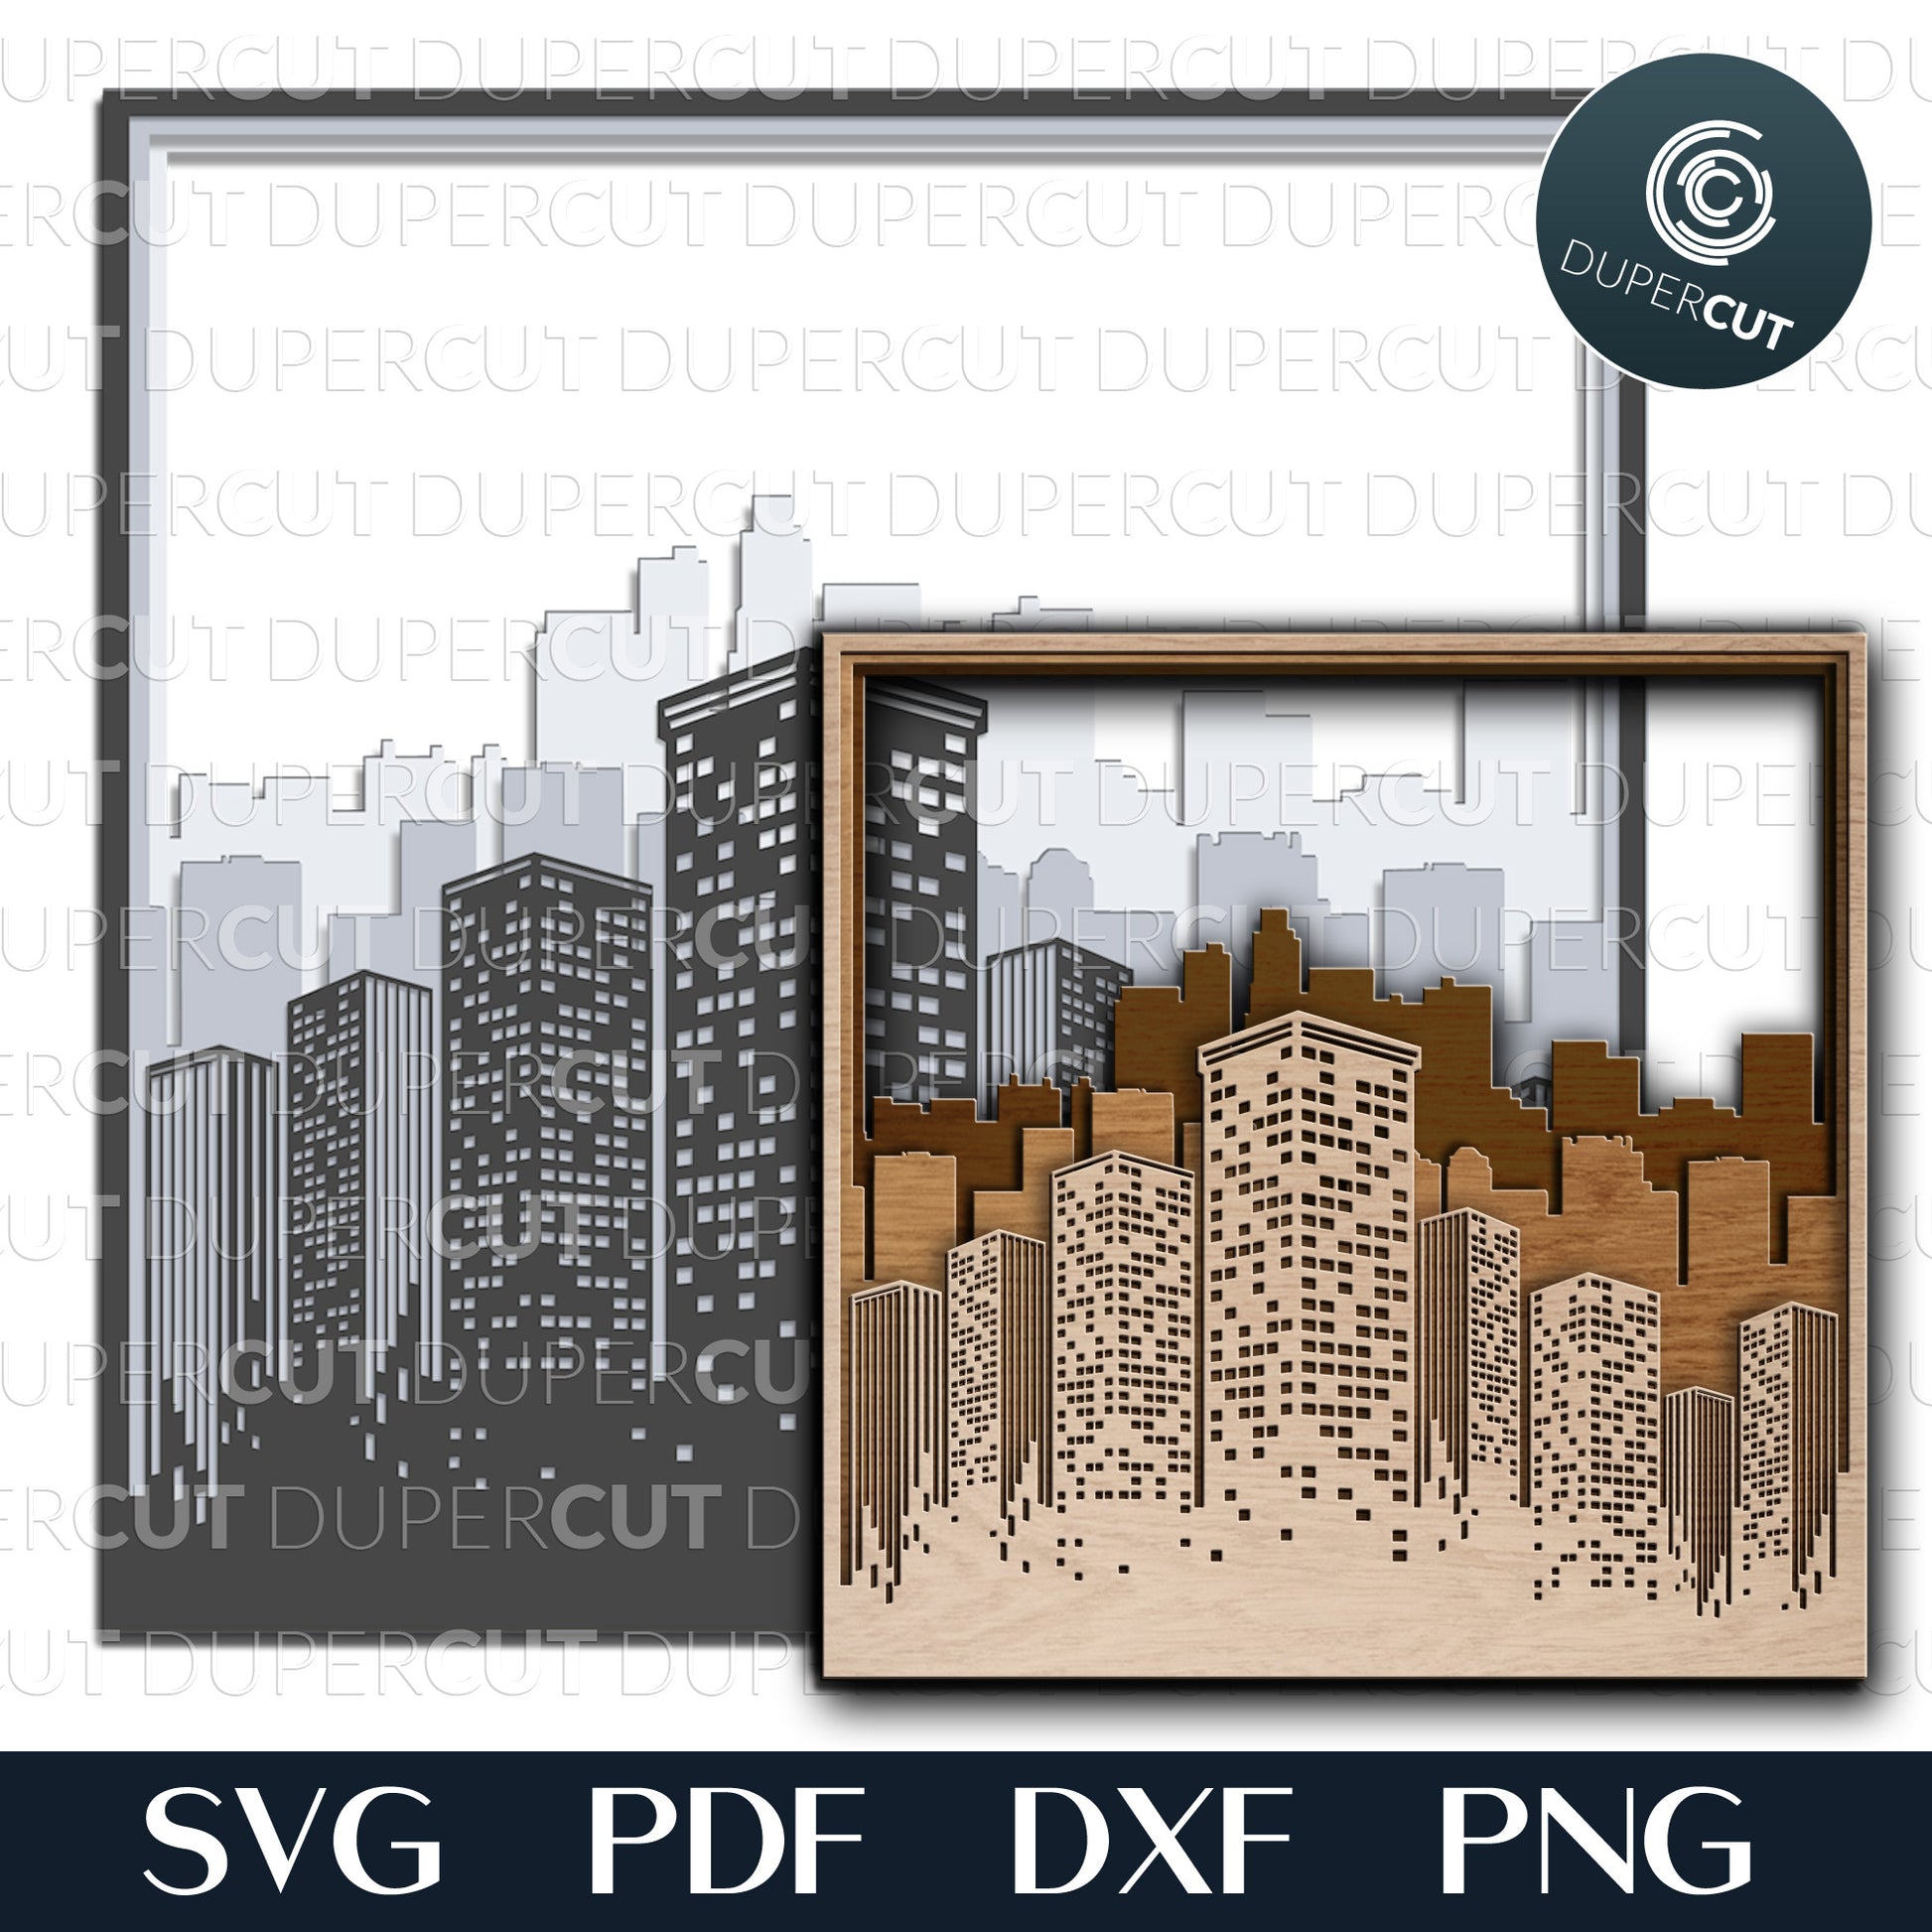 City skyline silhouette - layered cutting files - SVG PDF DXF vector template for Glowforge, Cricut, Silhouette Cameo, CNC plasma laser machines by DuperCut